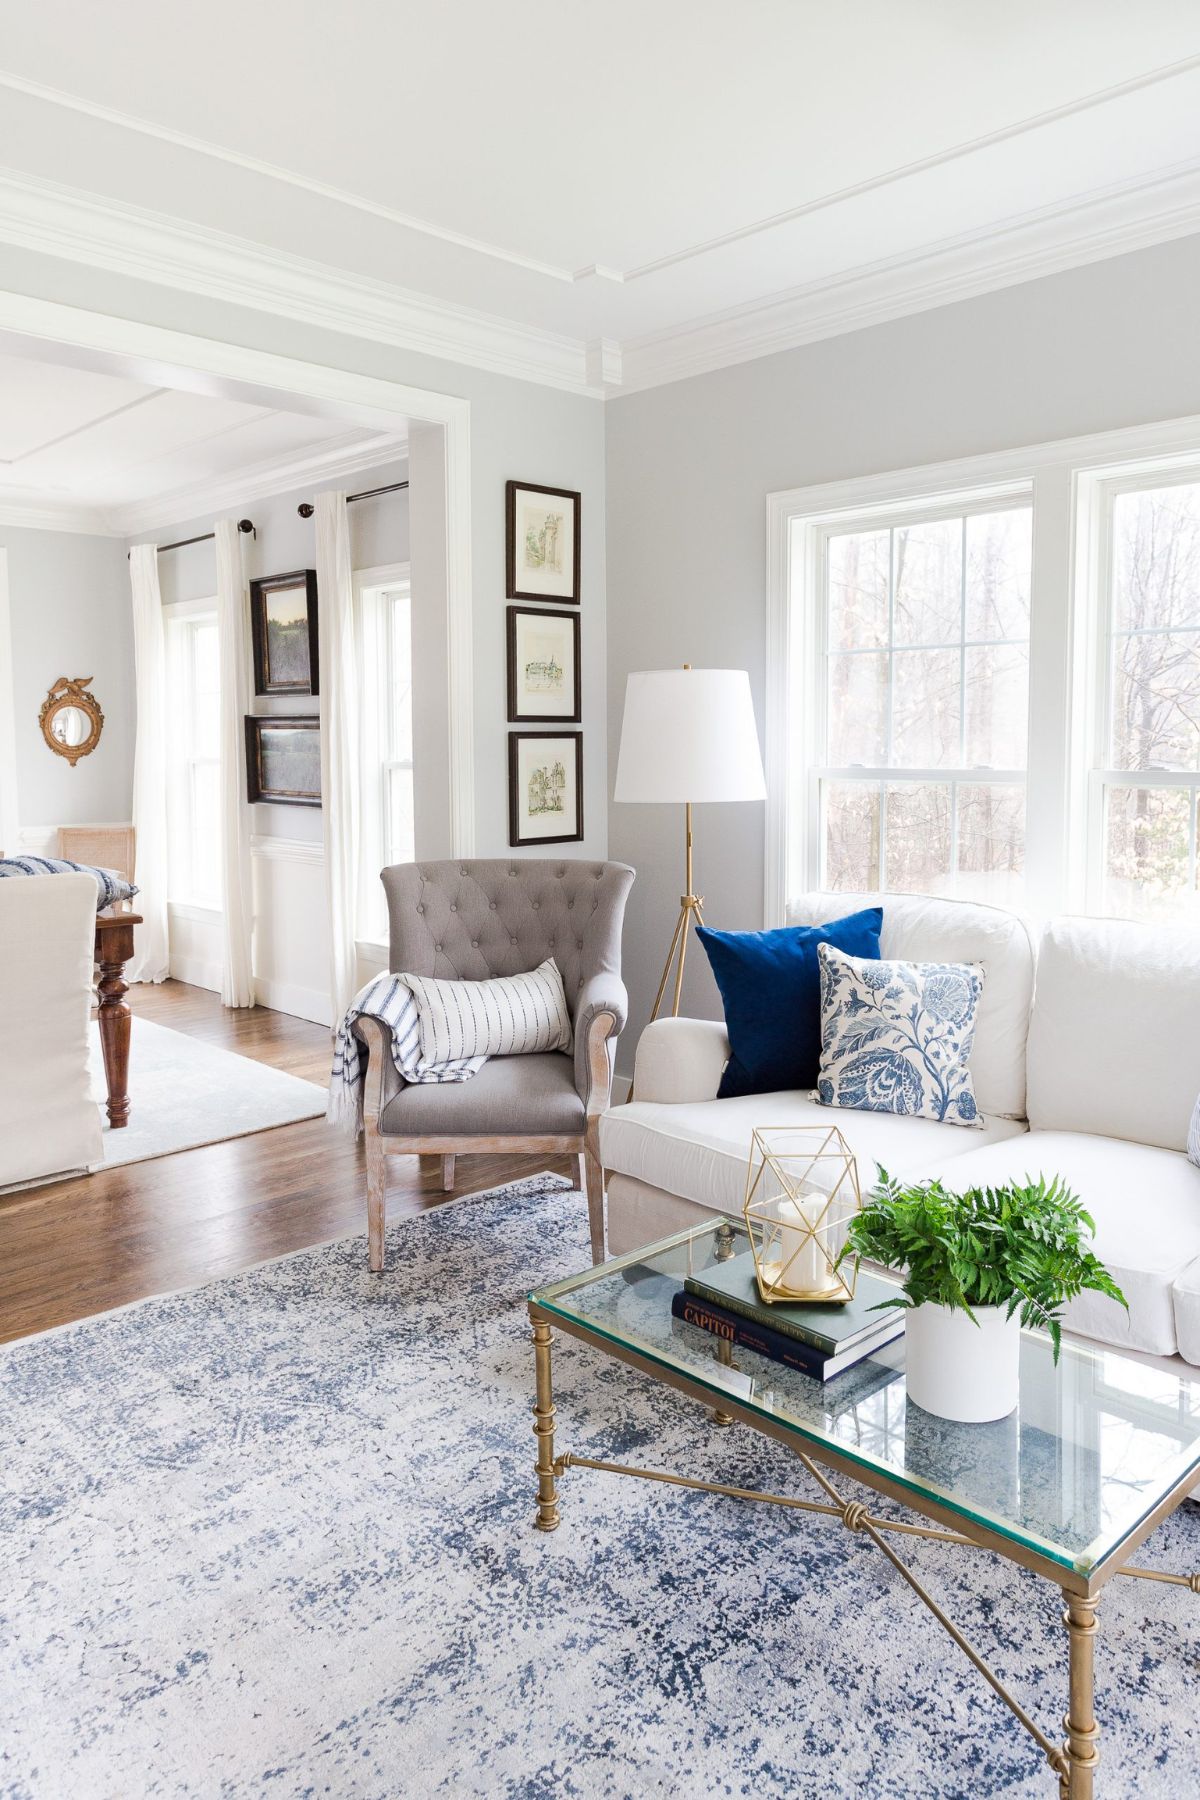 A family room painted in Passive with a cream couch and gold coffee table shown. A blue and white large floor rug is underneath the coffee table and there is a collection of frames hung on the wall.